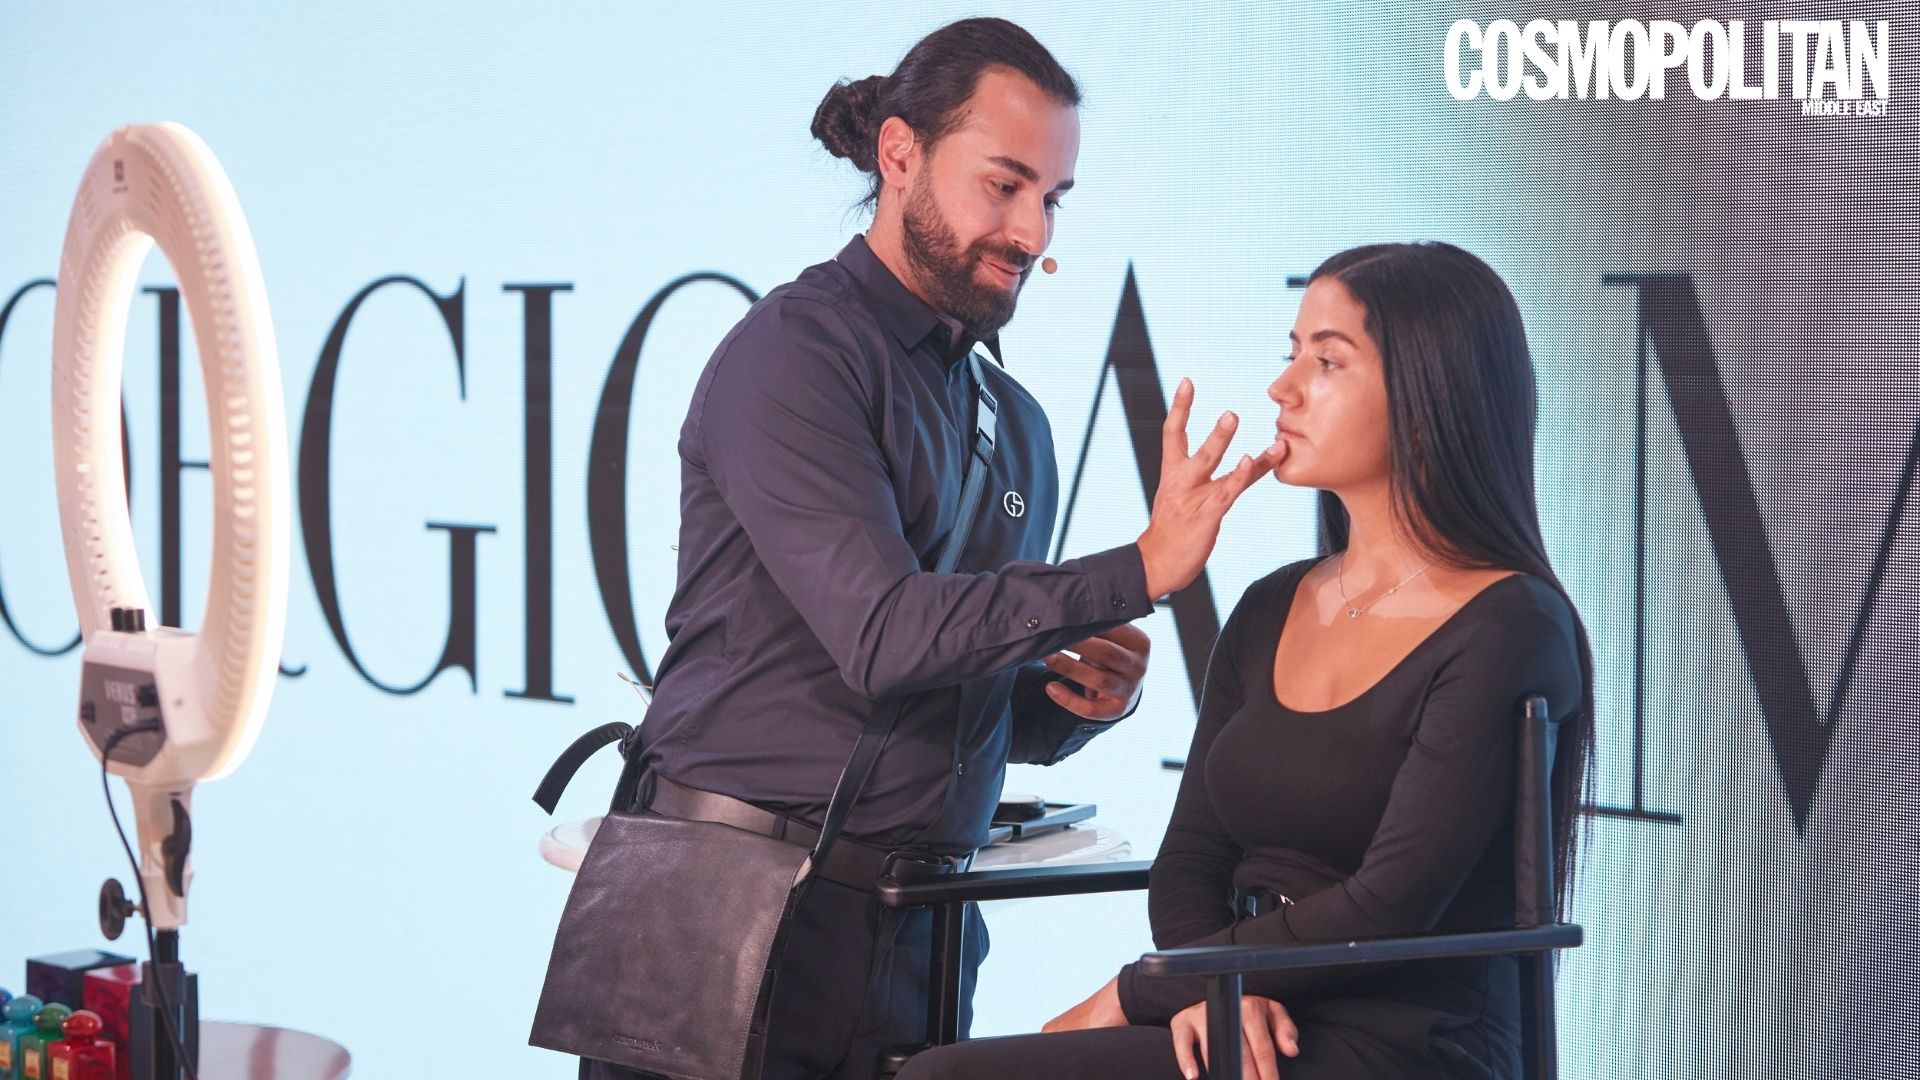 Armani Beauty’s guide to a runway-ready makeup look